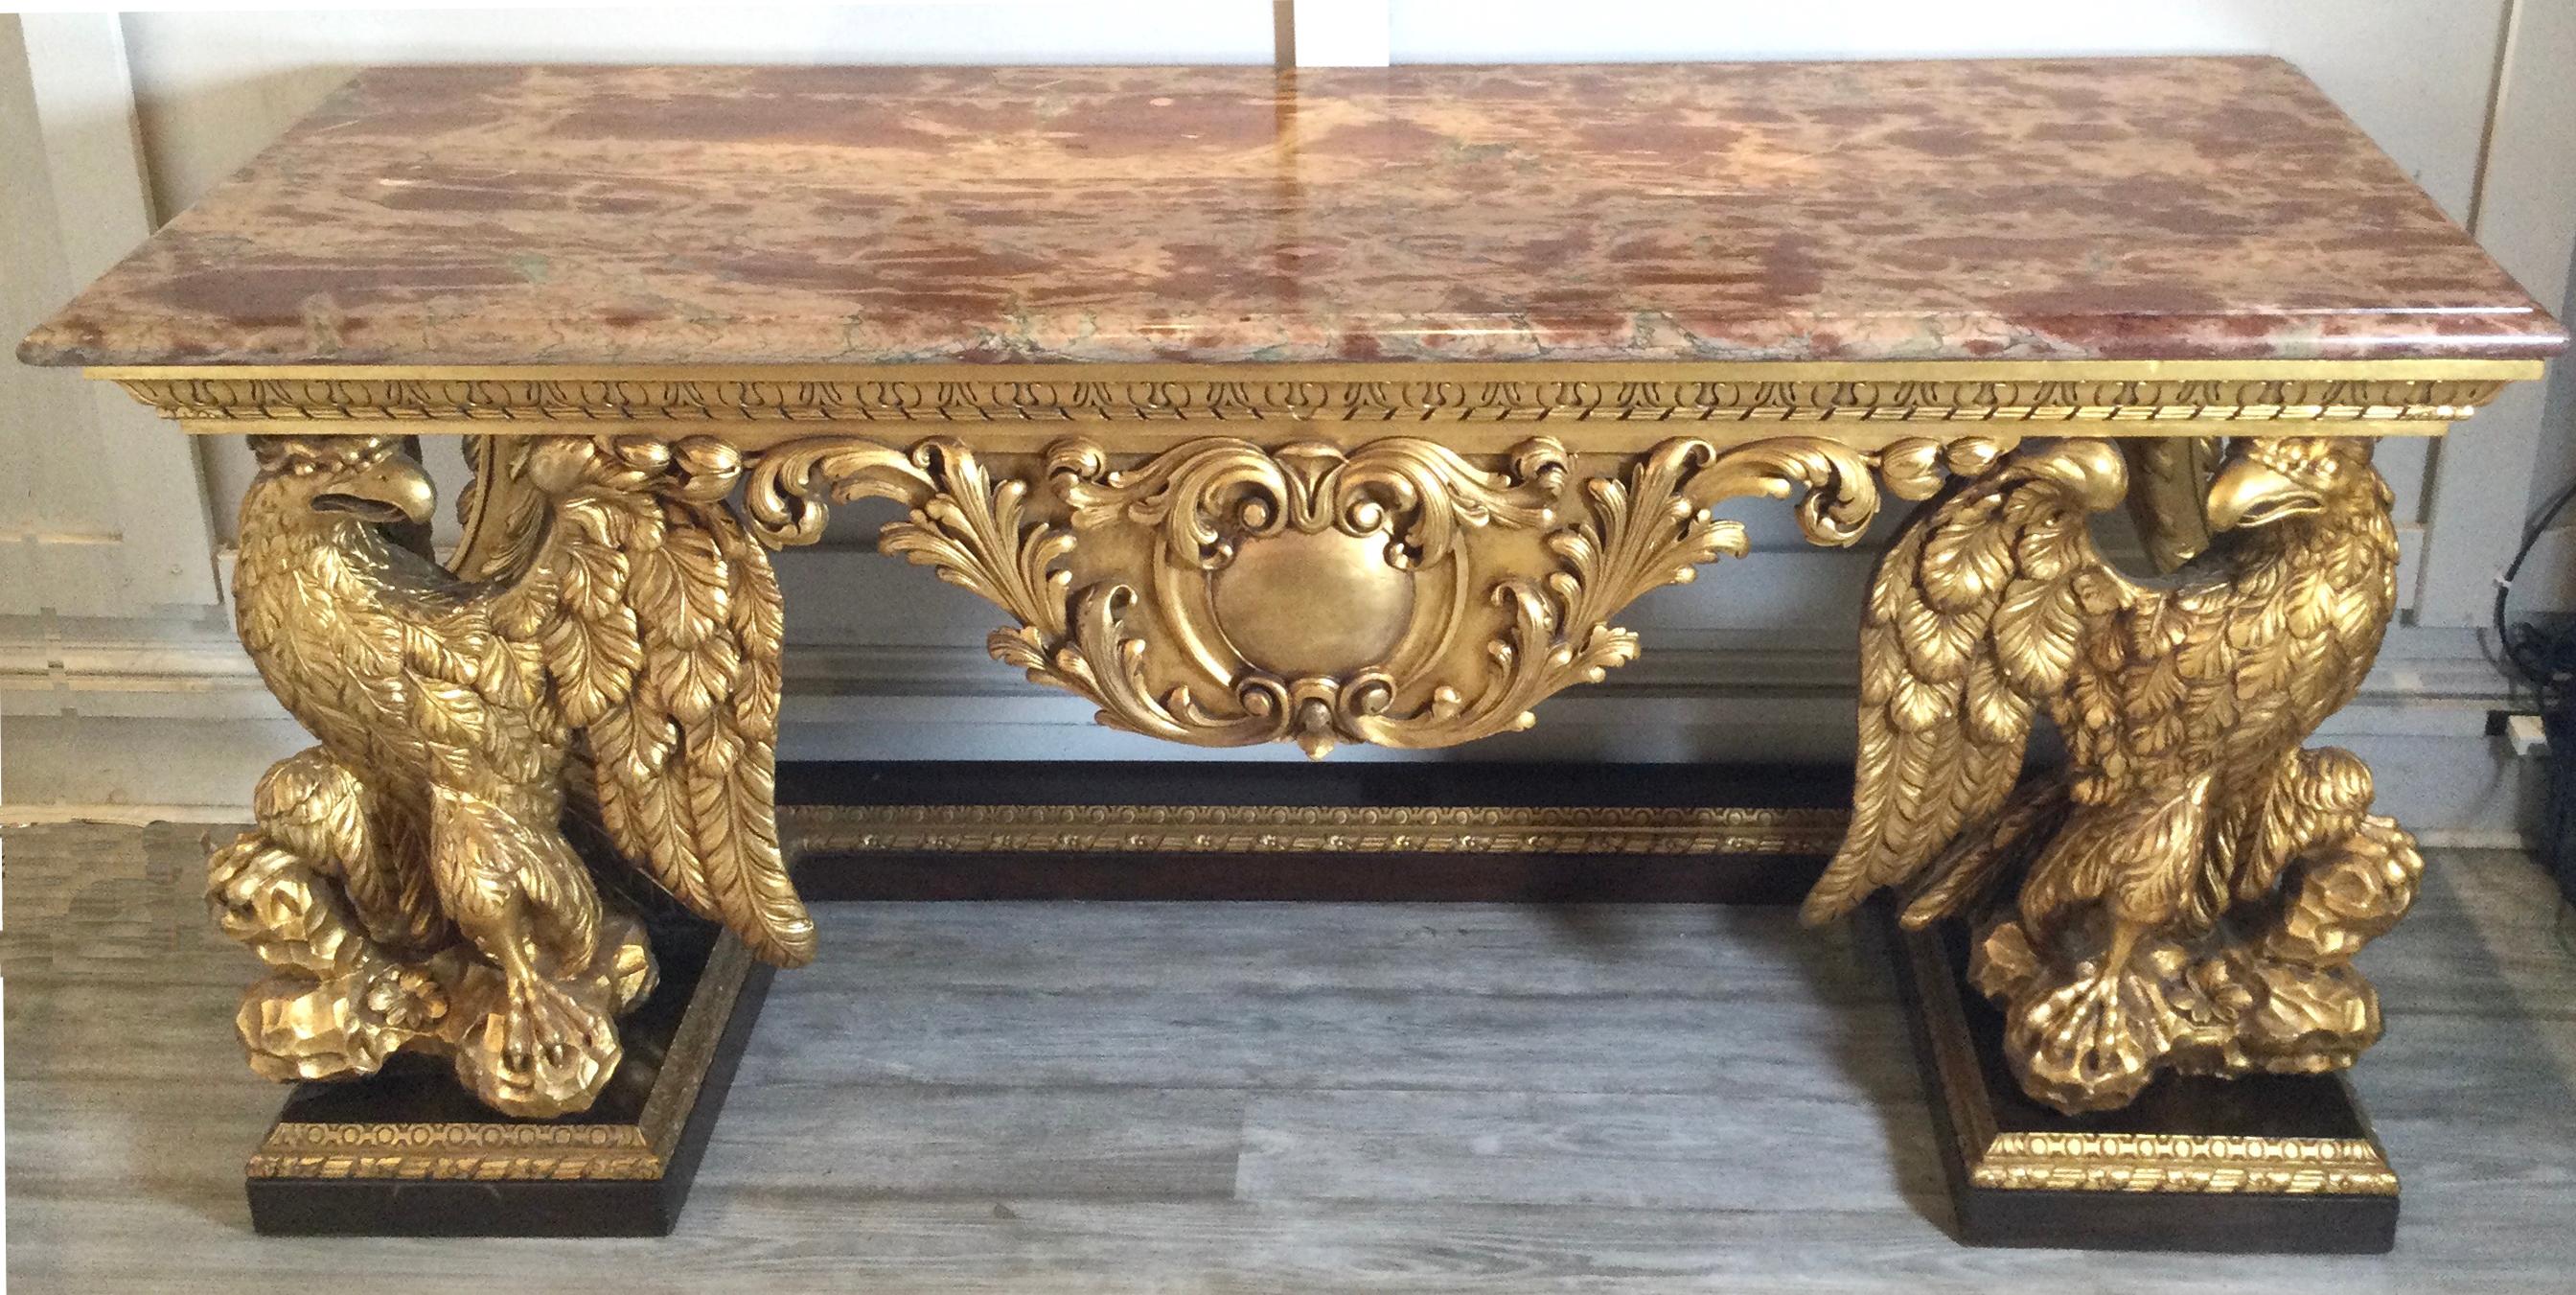 George II style gilt carved wood antique console with marble top, Circa 1926. The rectangular marble top above a frieze centering a cartouche, raised on a fully carved eagle supports. The marble is absolutely stunning.
Dimensions: H-35